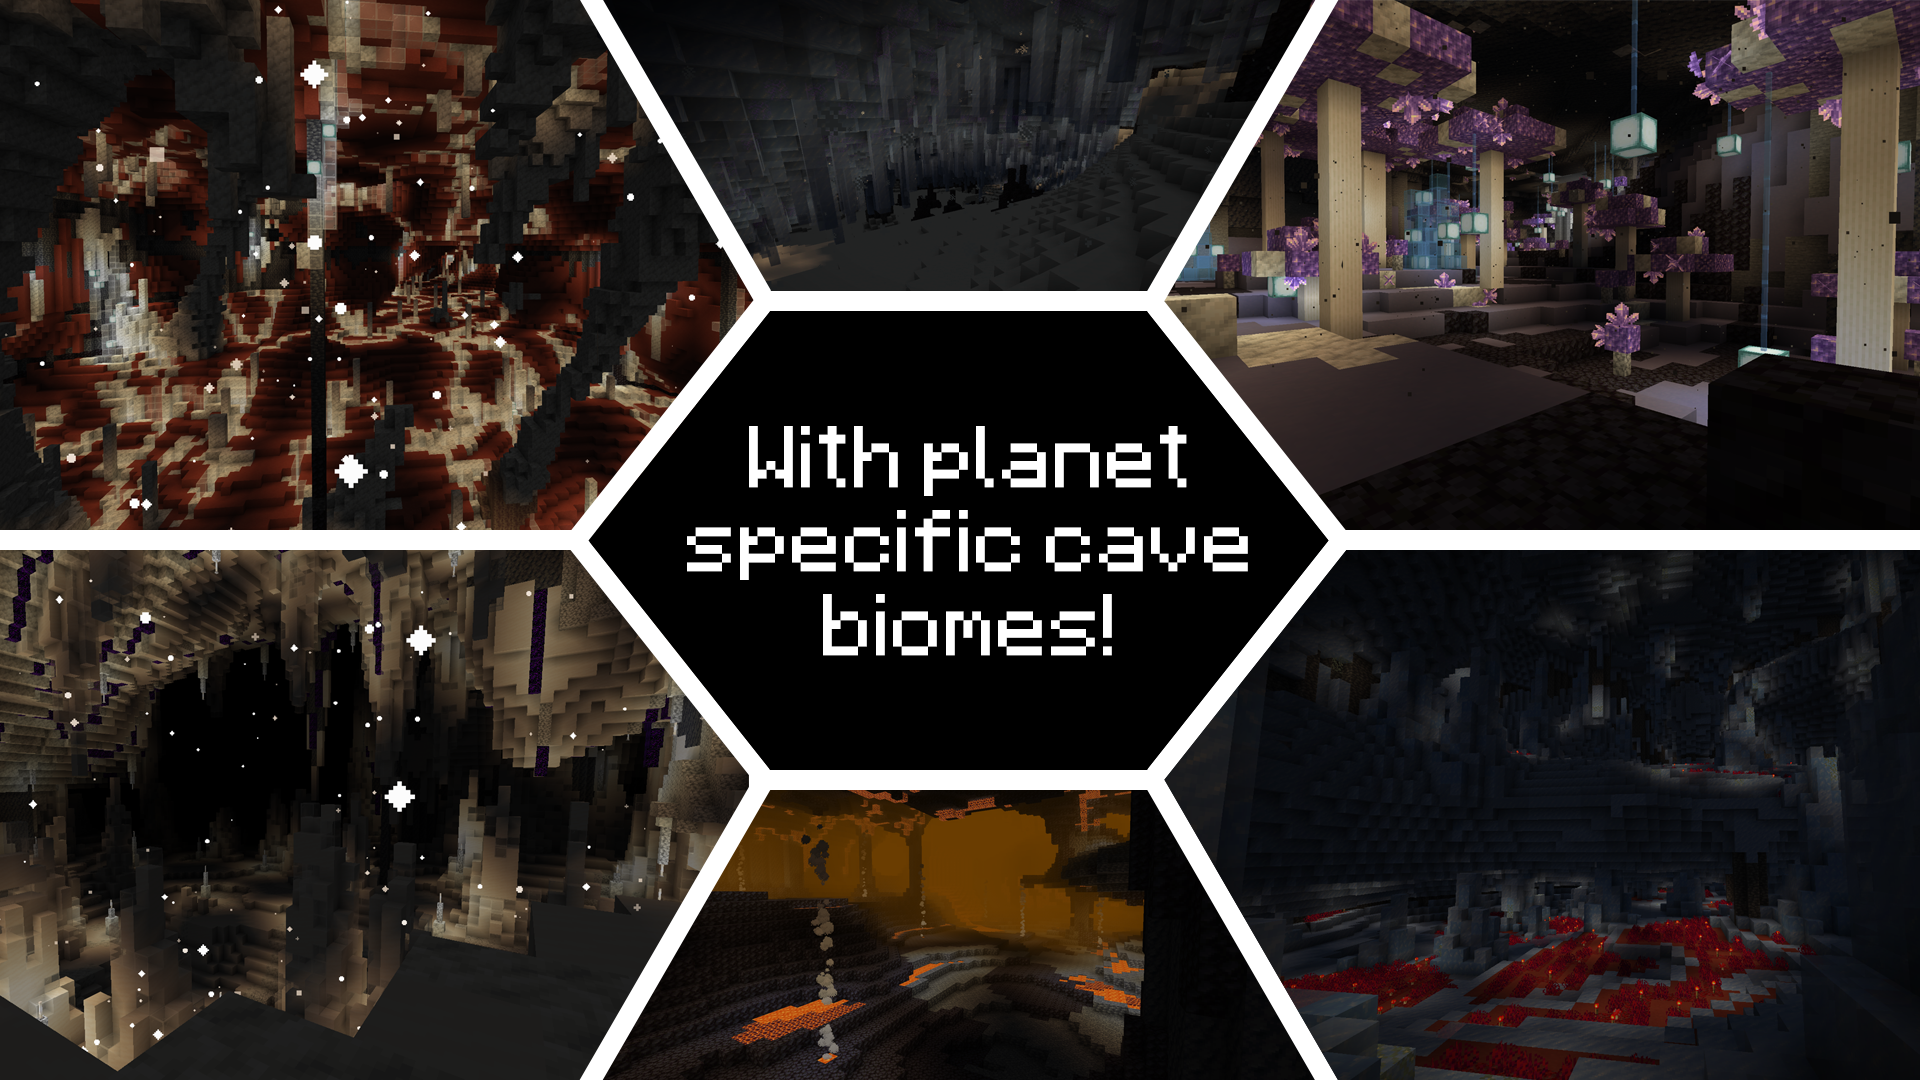 Planet Specific Cave Biomes!